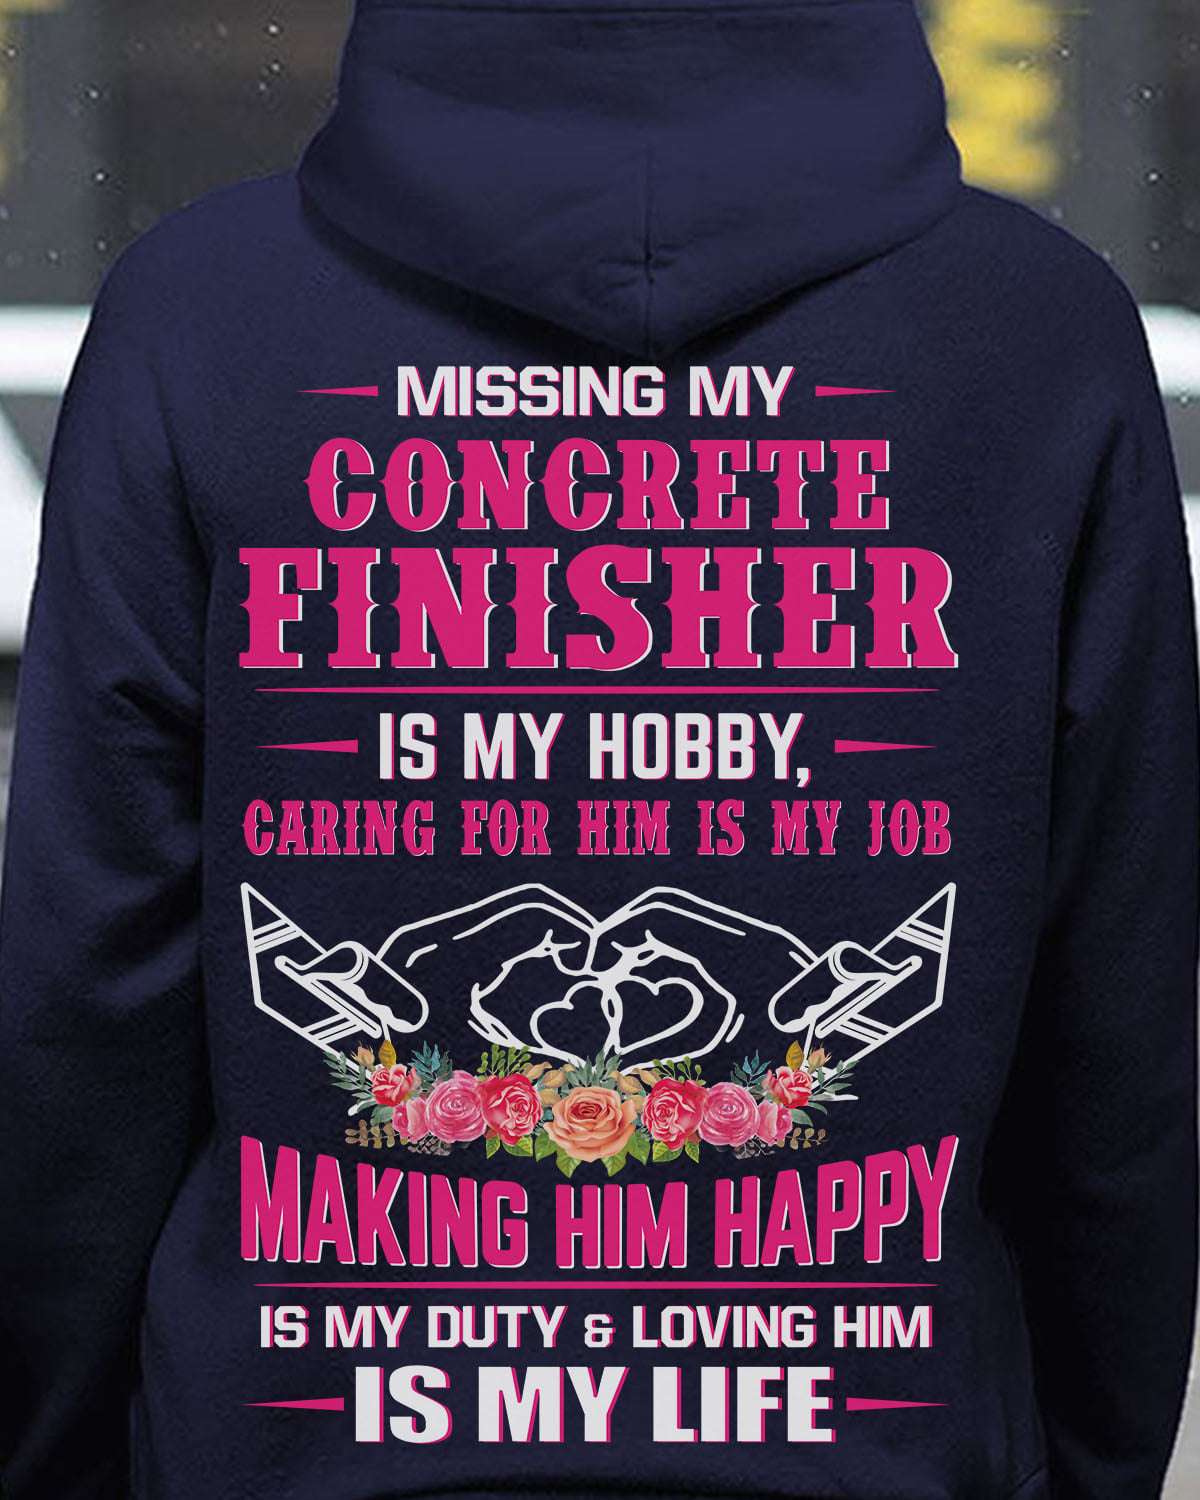 Missing my concrete finisher is my hobby caring for him is my job making him happy is my duty and loving him is my life